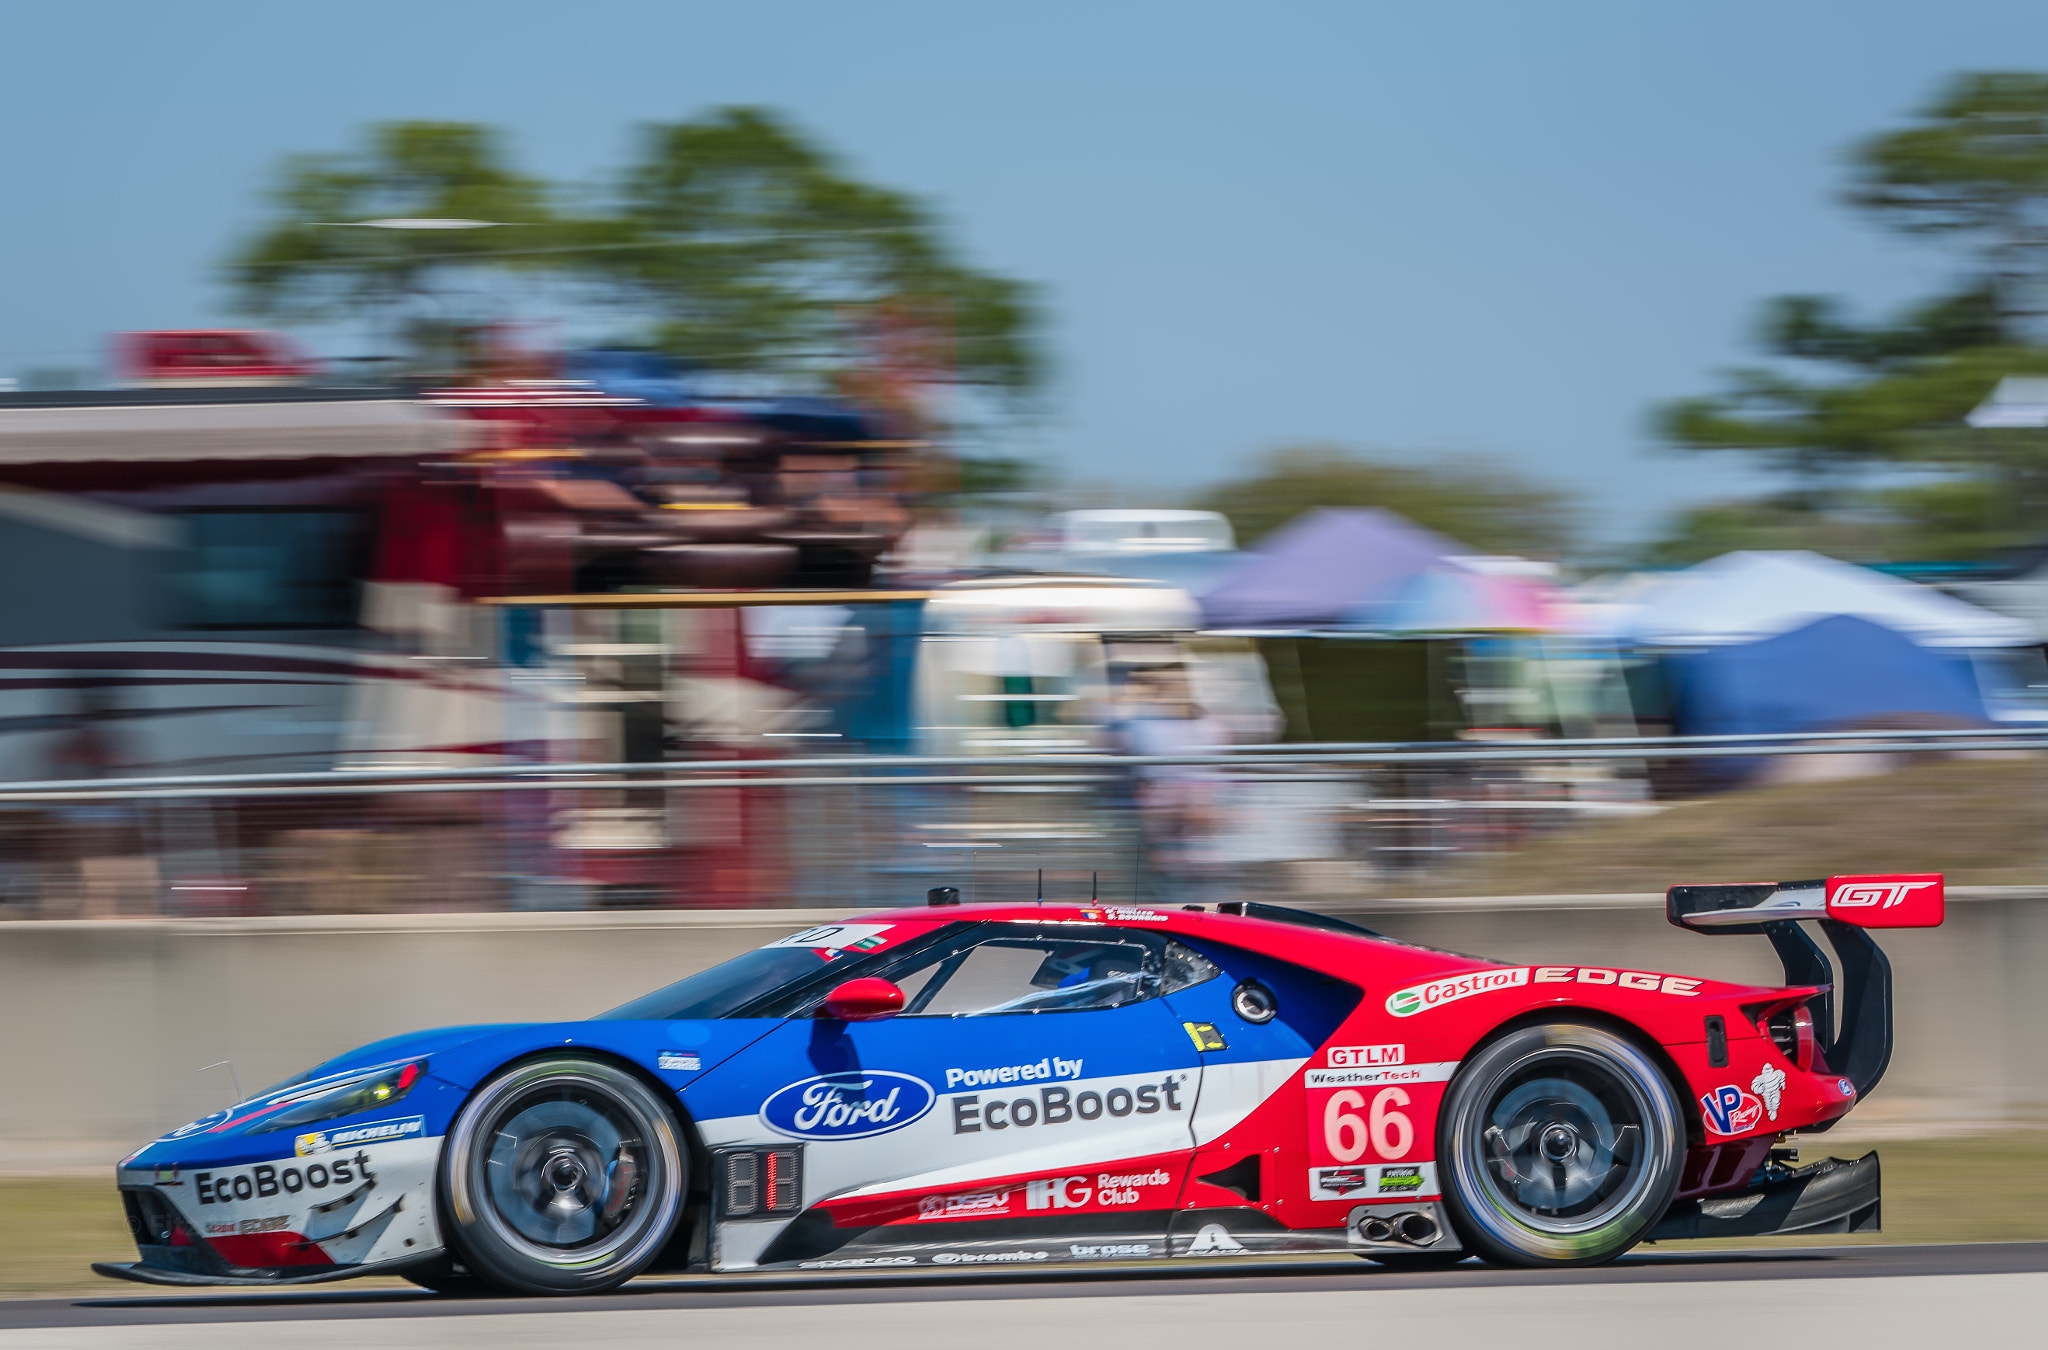 Sony a7R II sample photo. Ford 12 hr of sebring photography